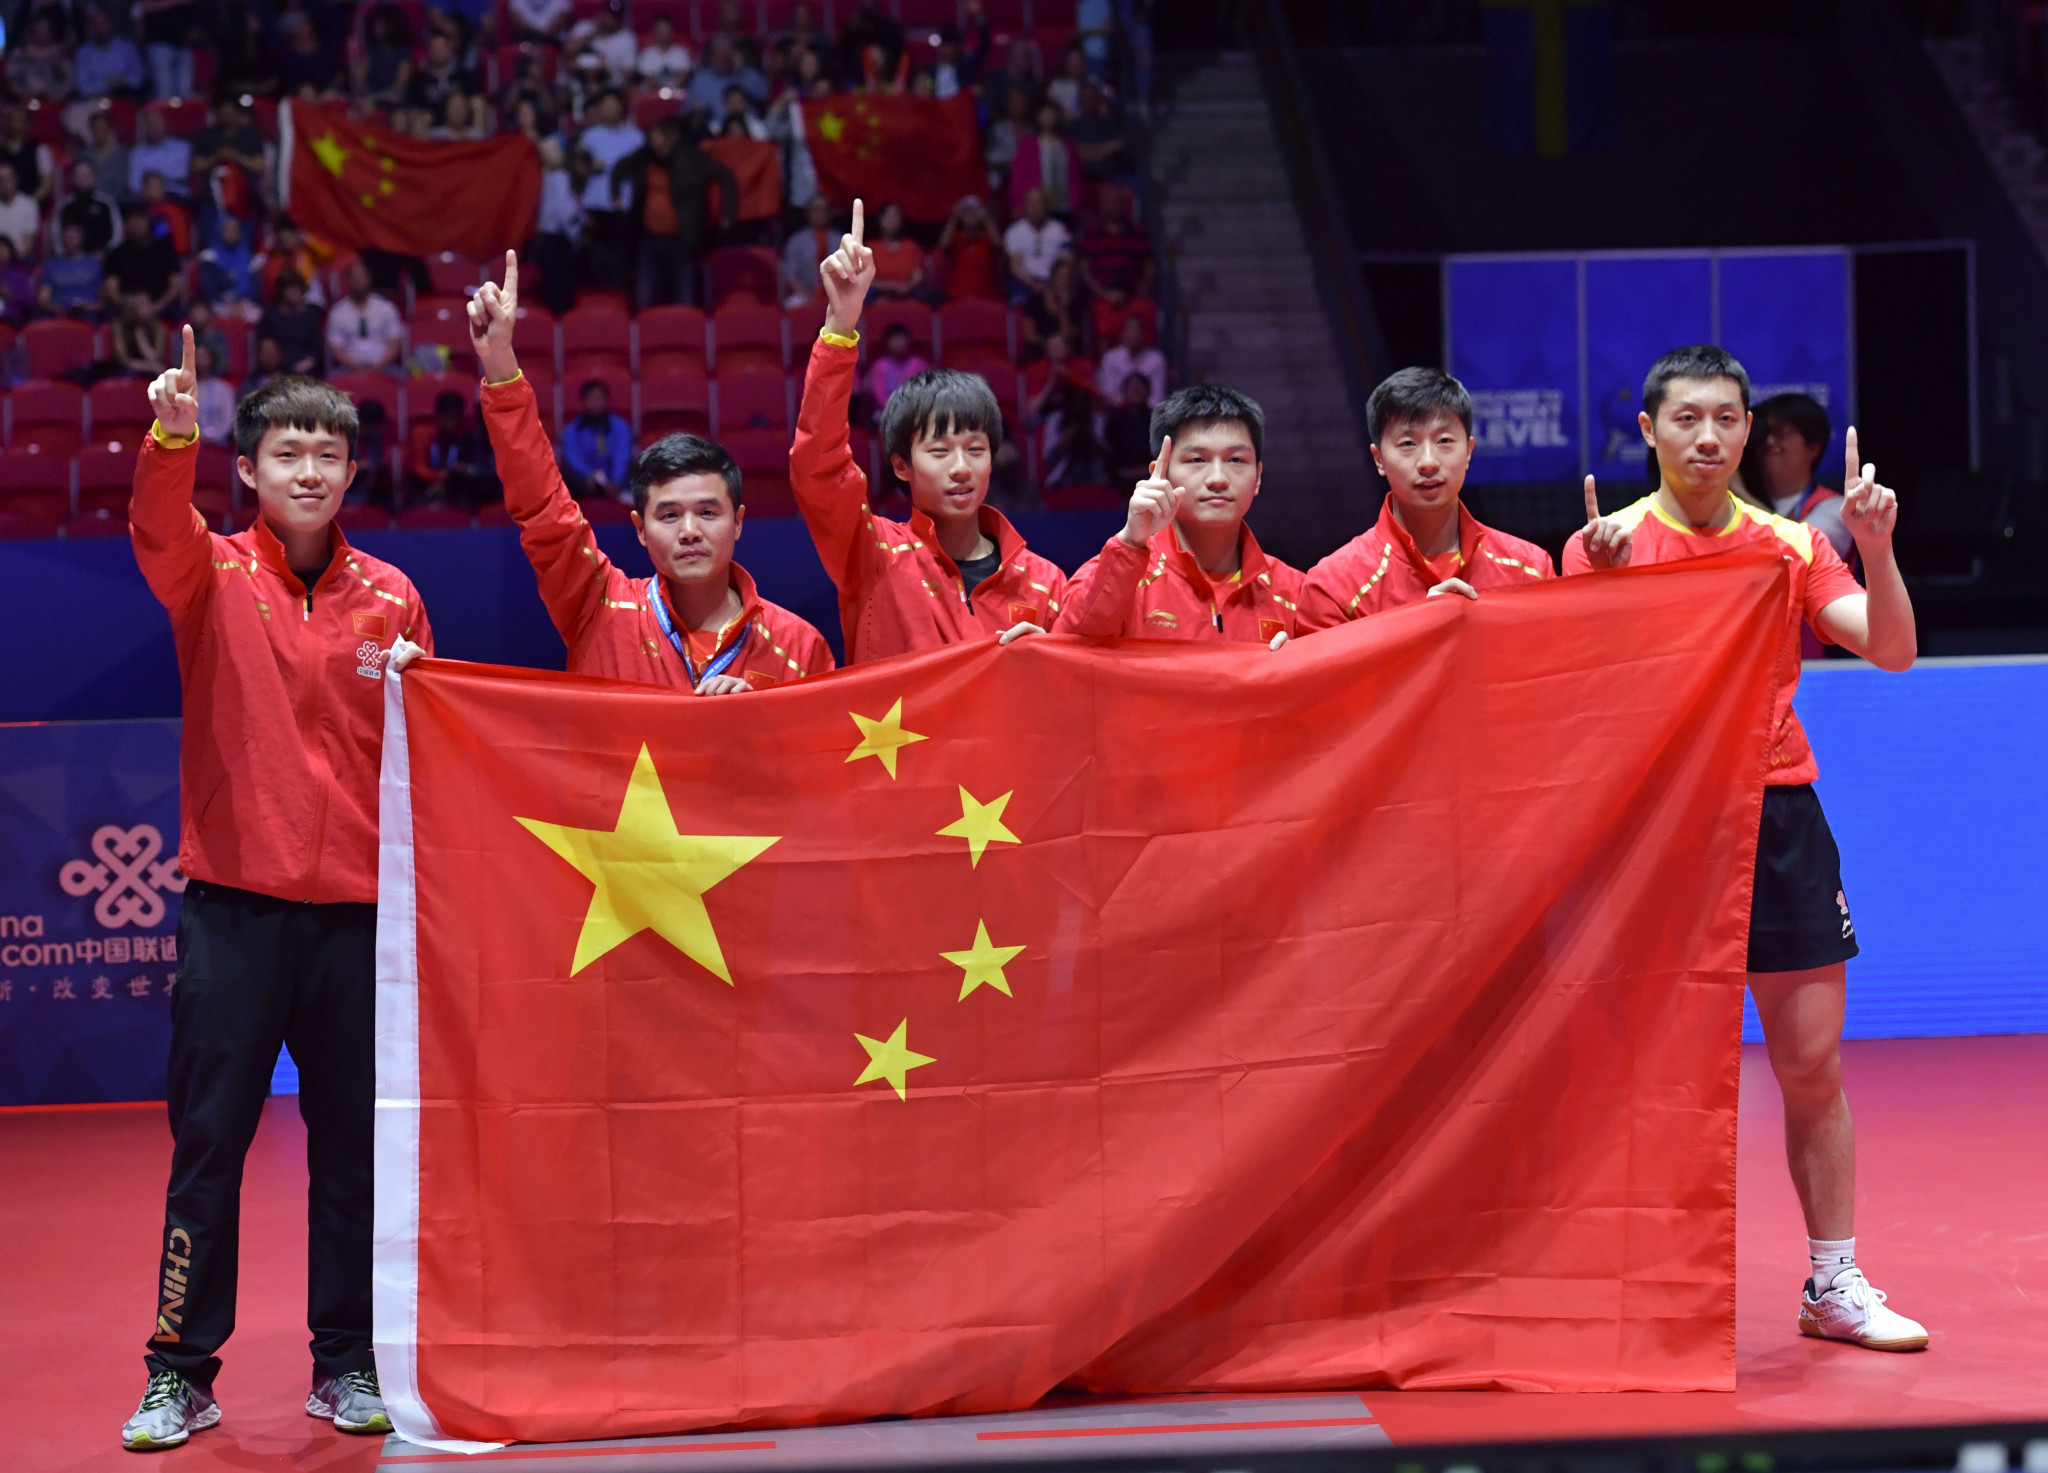 China won the men's and women's team titles in 2018 ©Getty Images